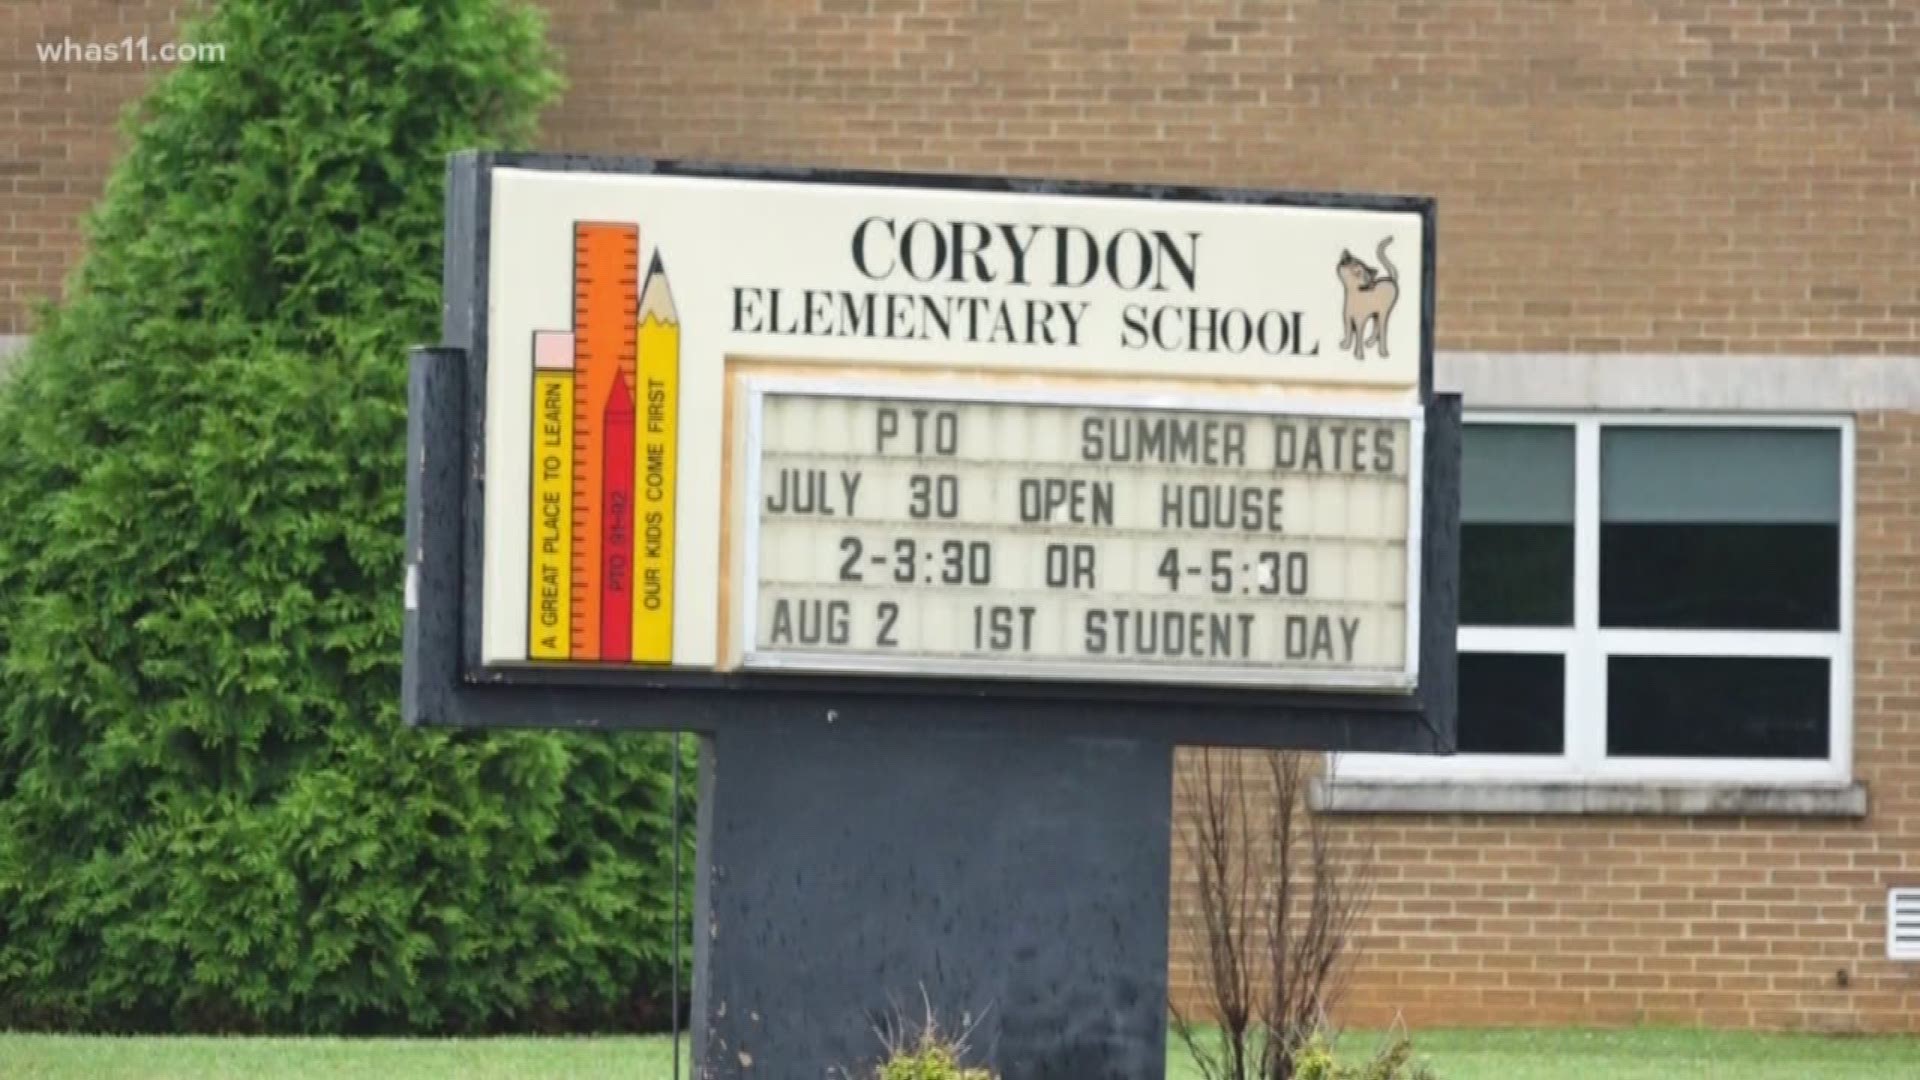 The man caught at Corydon Elementary School with a pellet gun is headed to court Monday.